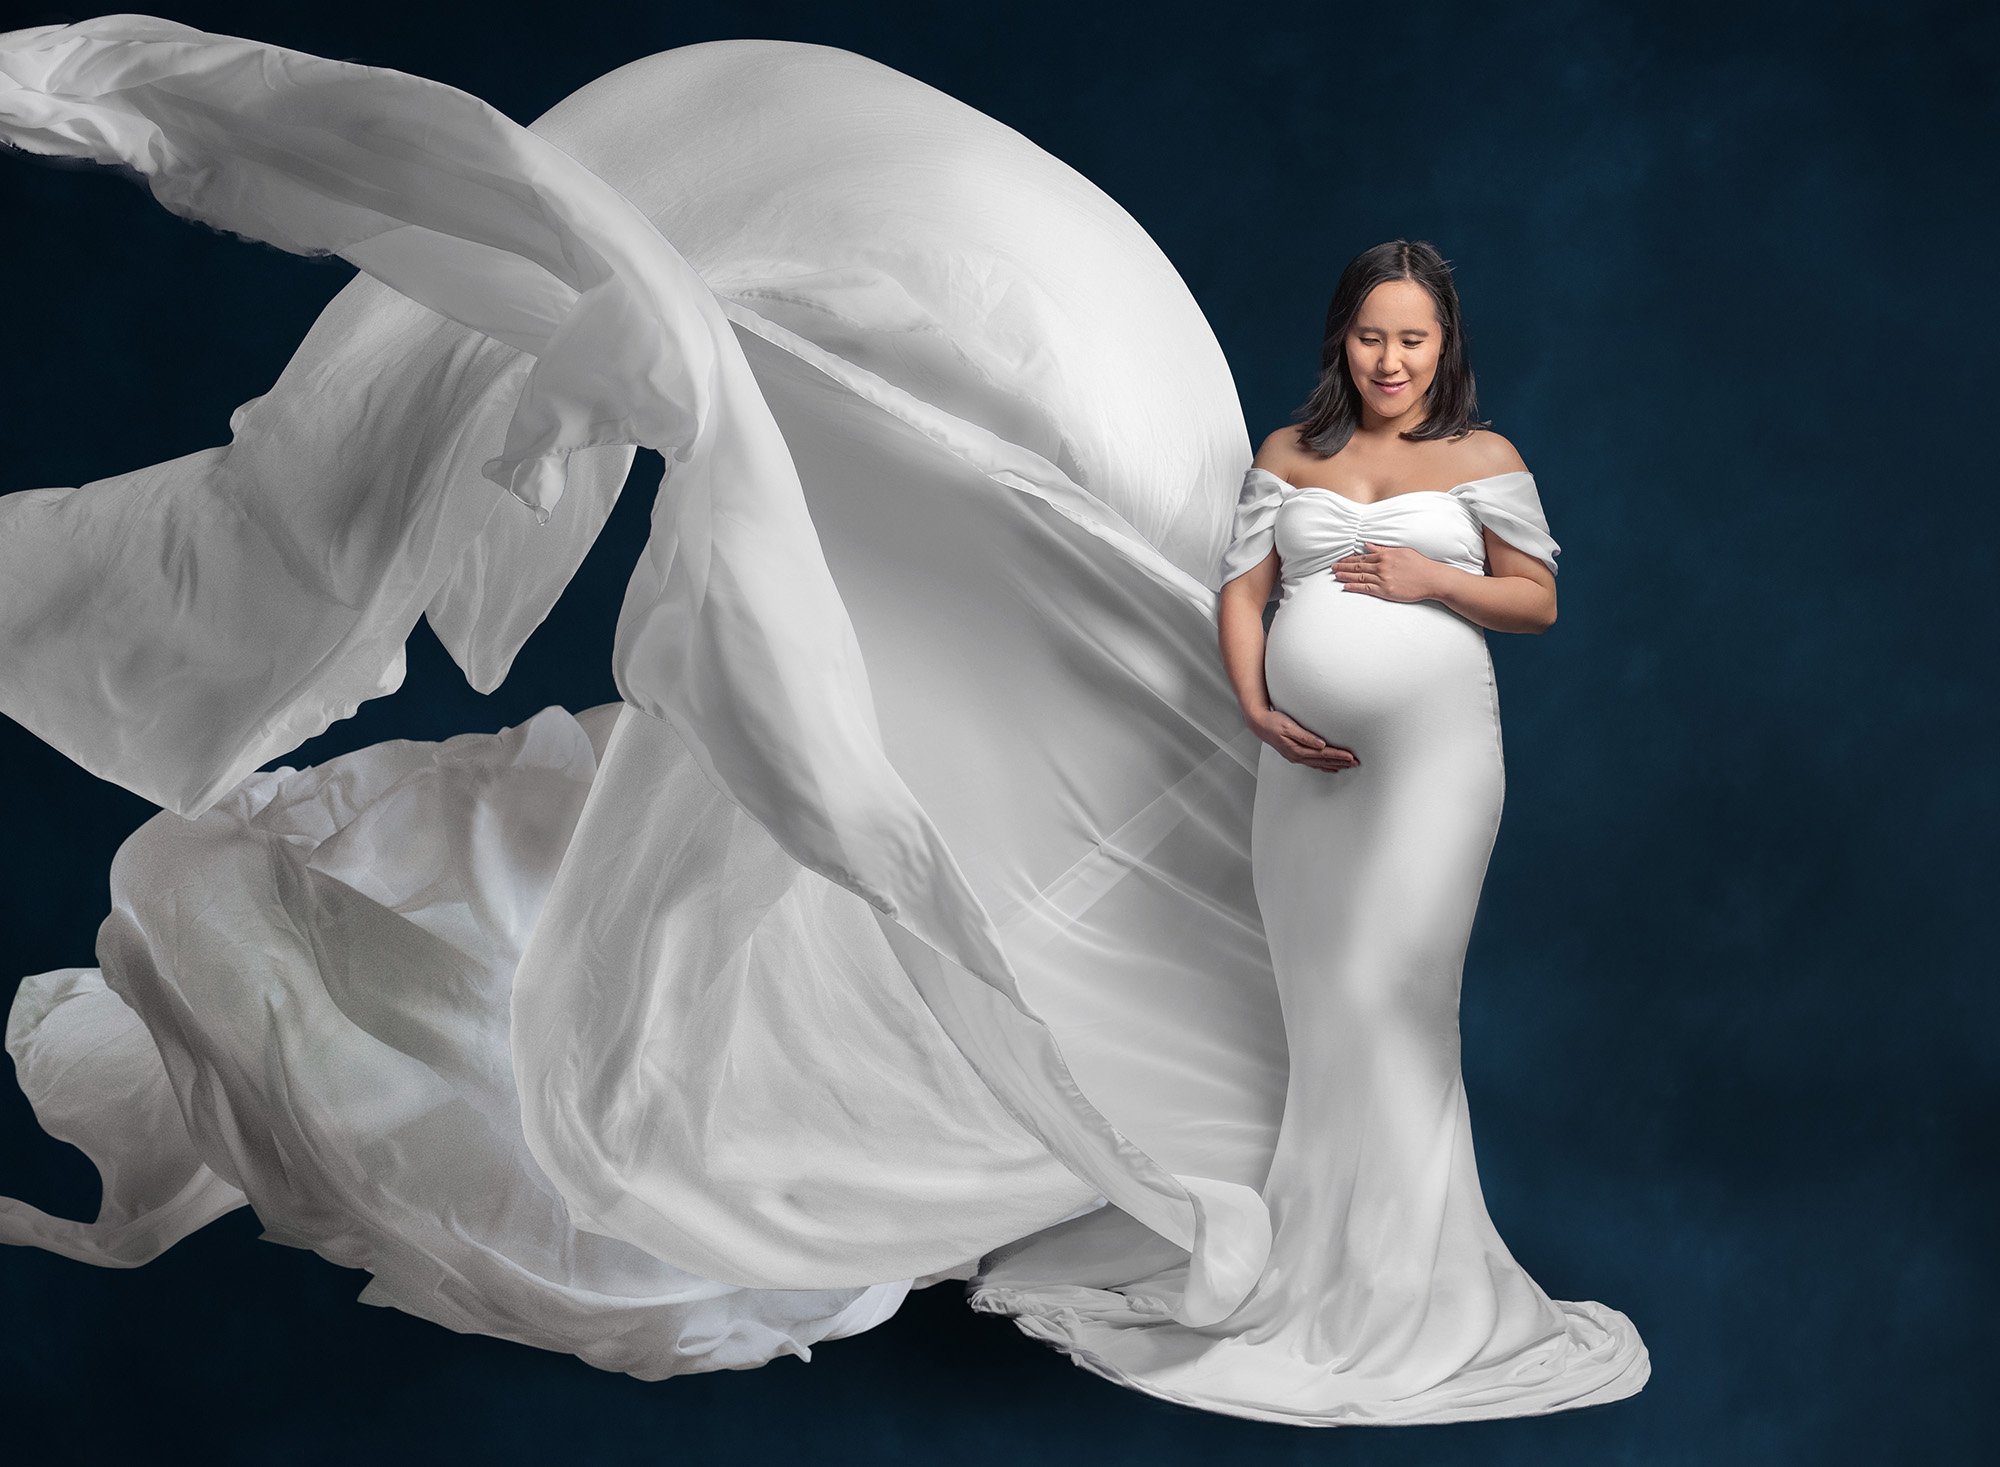 vibrant maternity photo brunette woman wearing white flowing maternity dress on a navy blue background